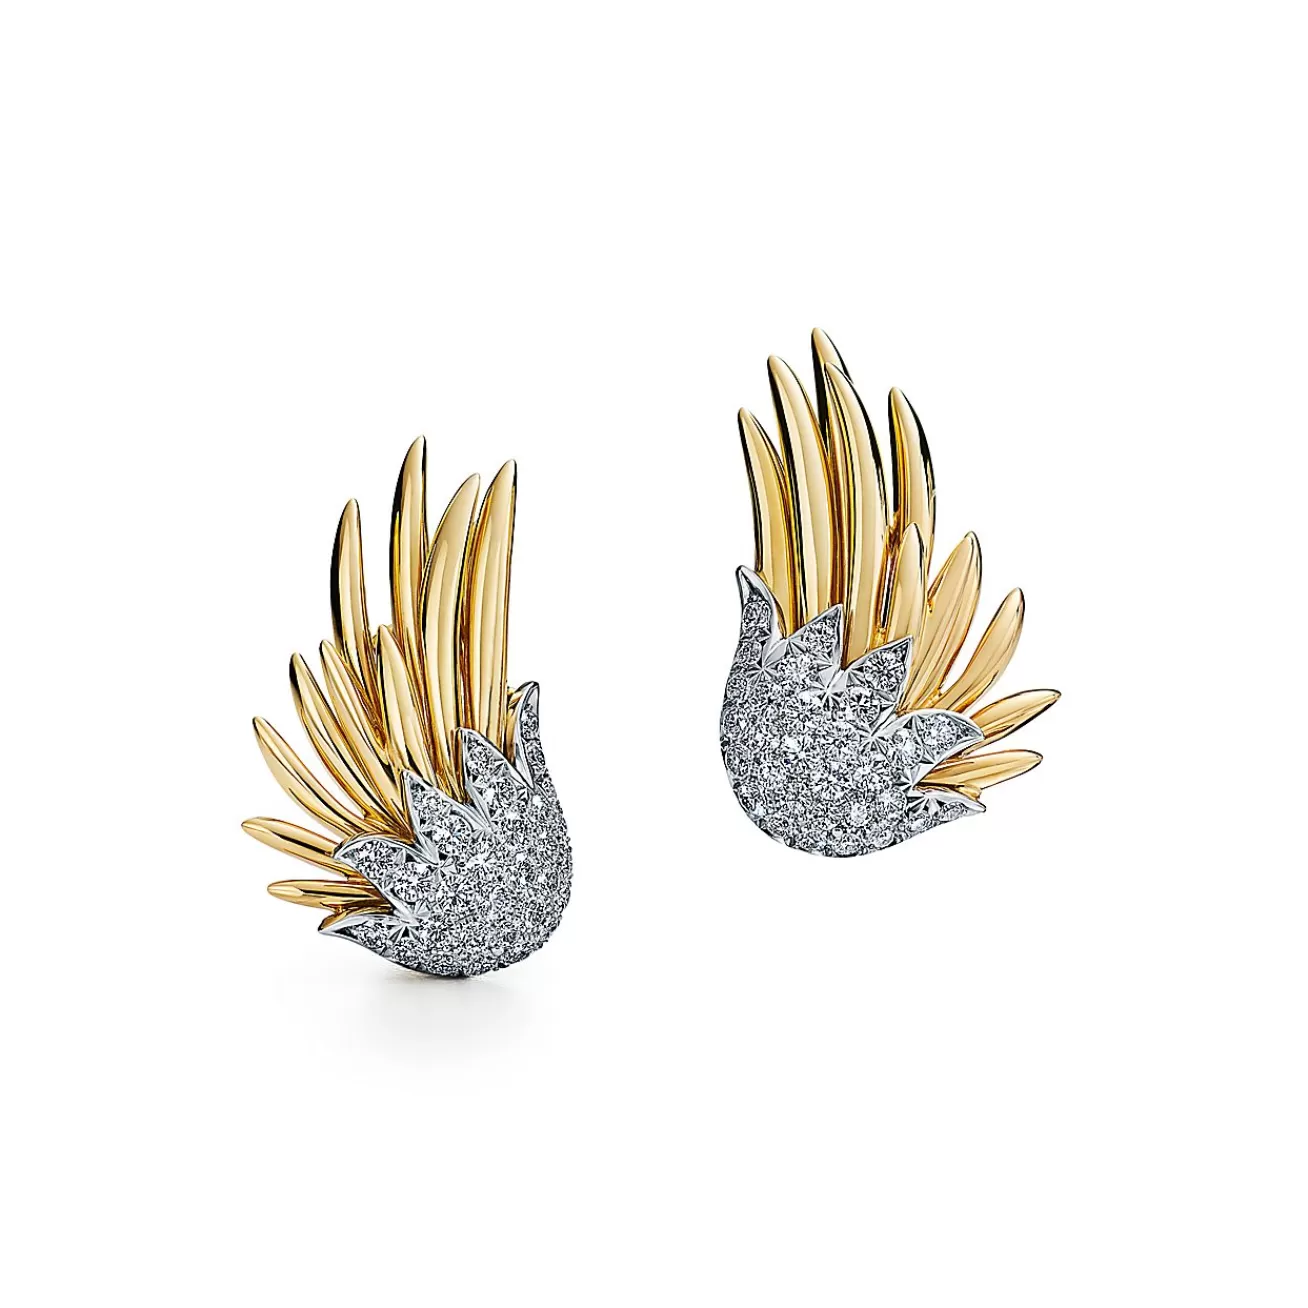 Tiffany & Co. Schlumberger® Flame Ear Clips in Gold and Platinum with Diamonds | ^ Earrings | Gold Jewelry